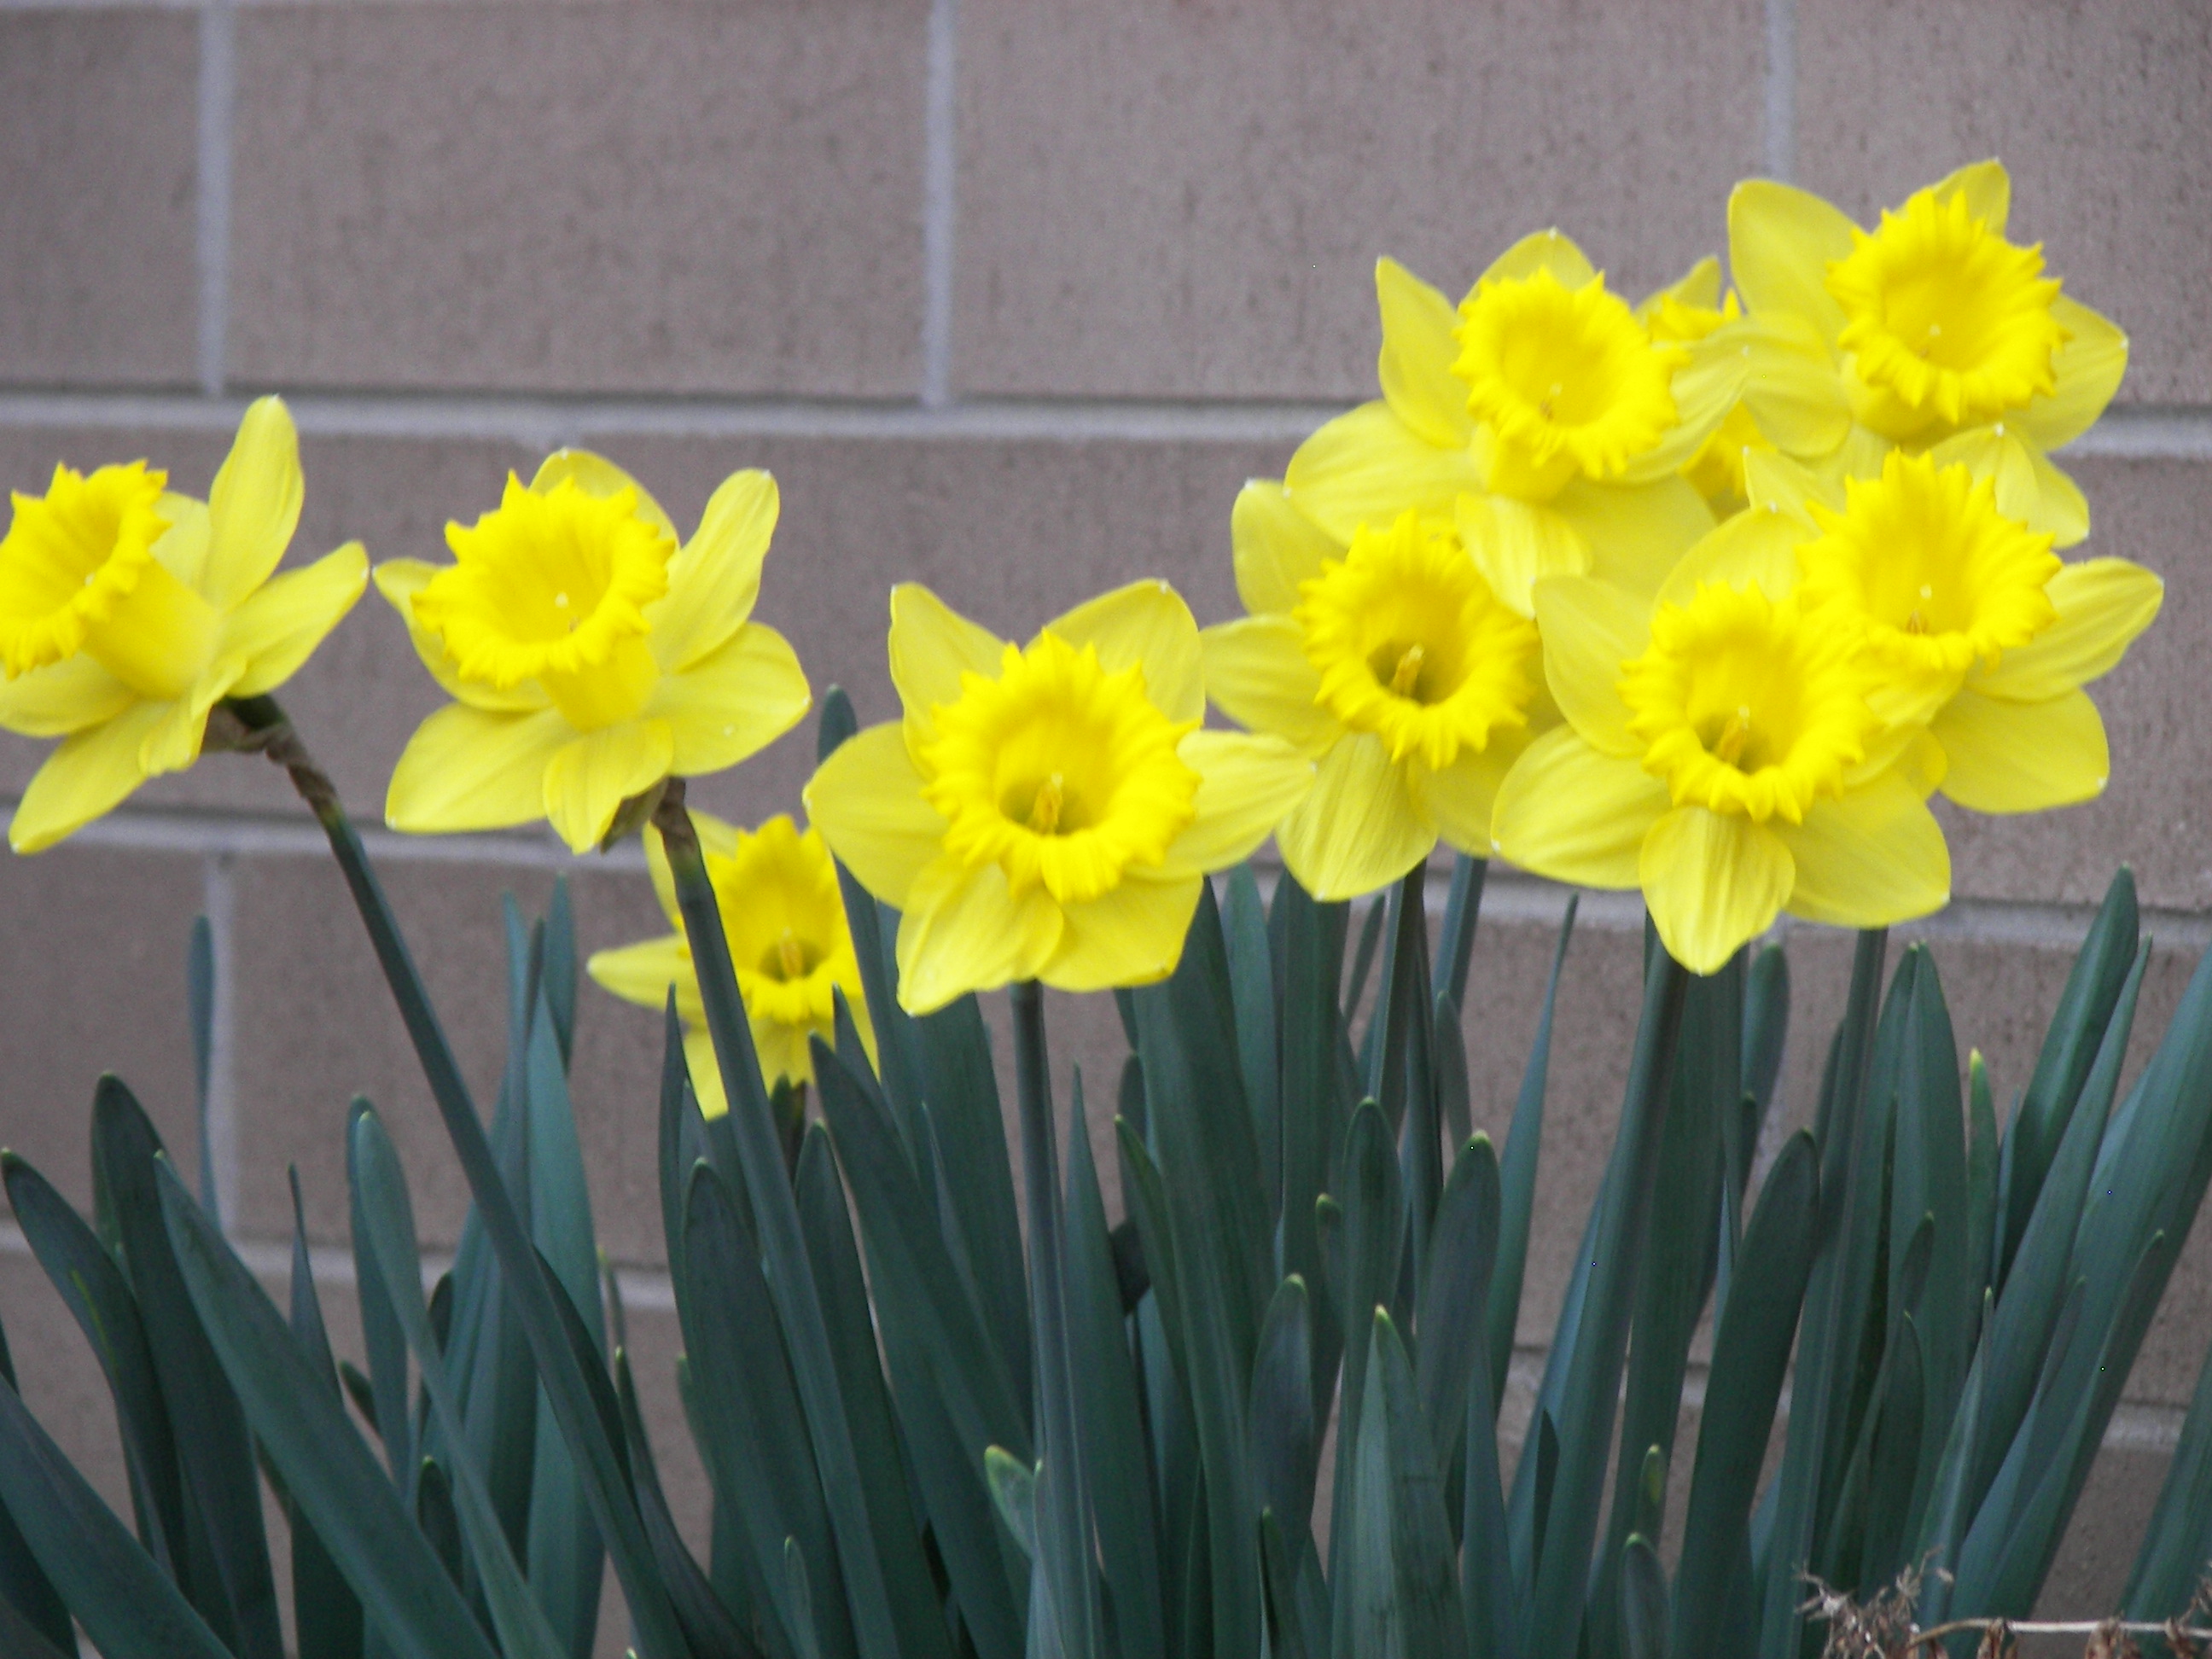 Daffodils outside the city building in DuBois